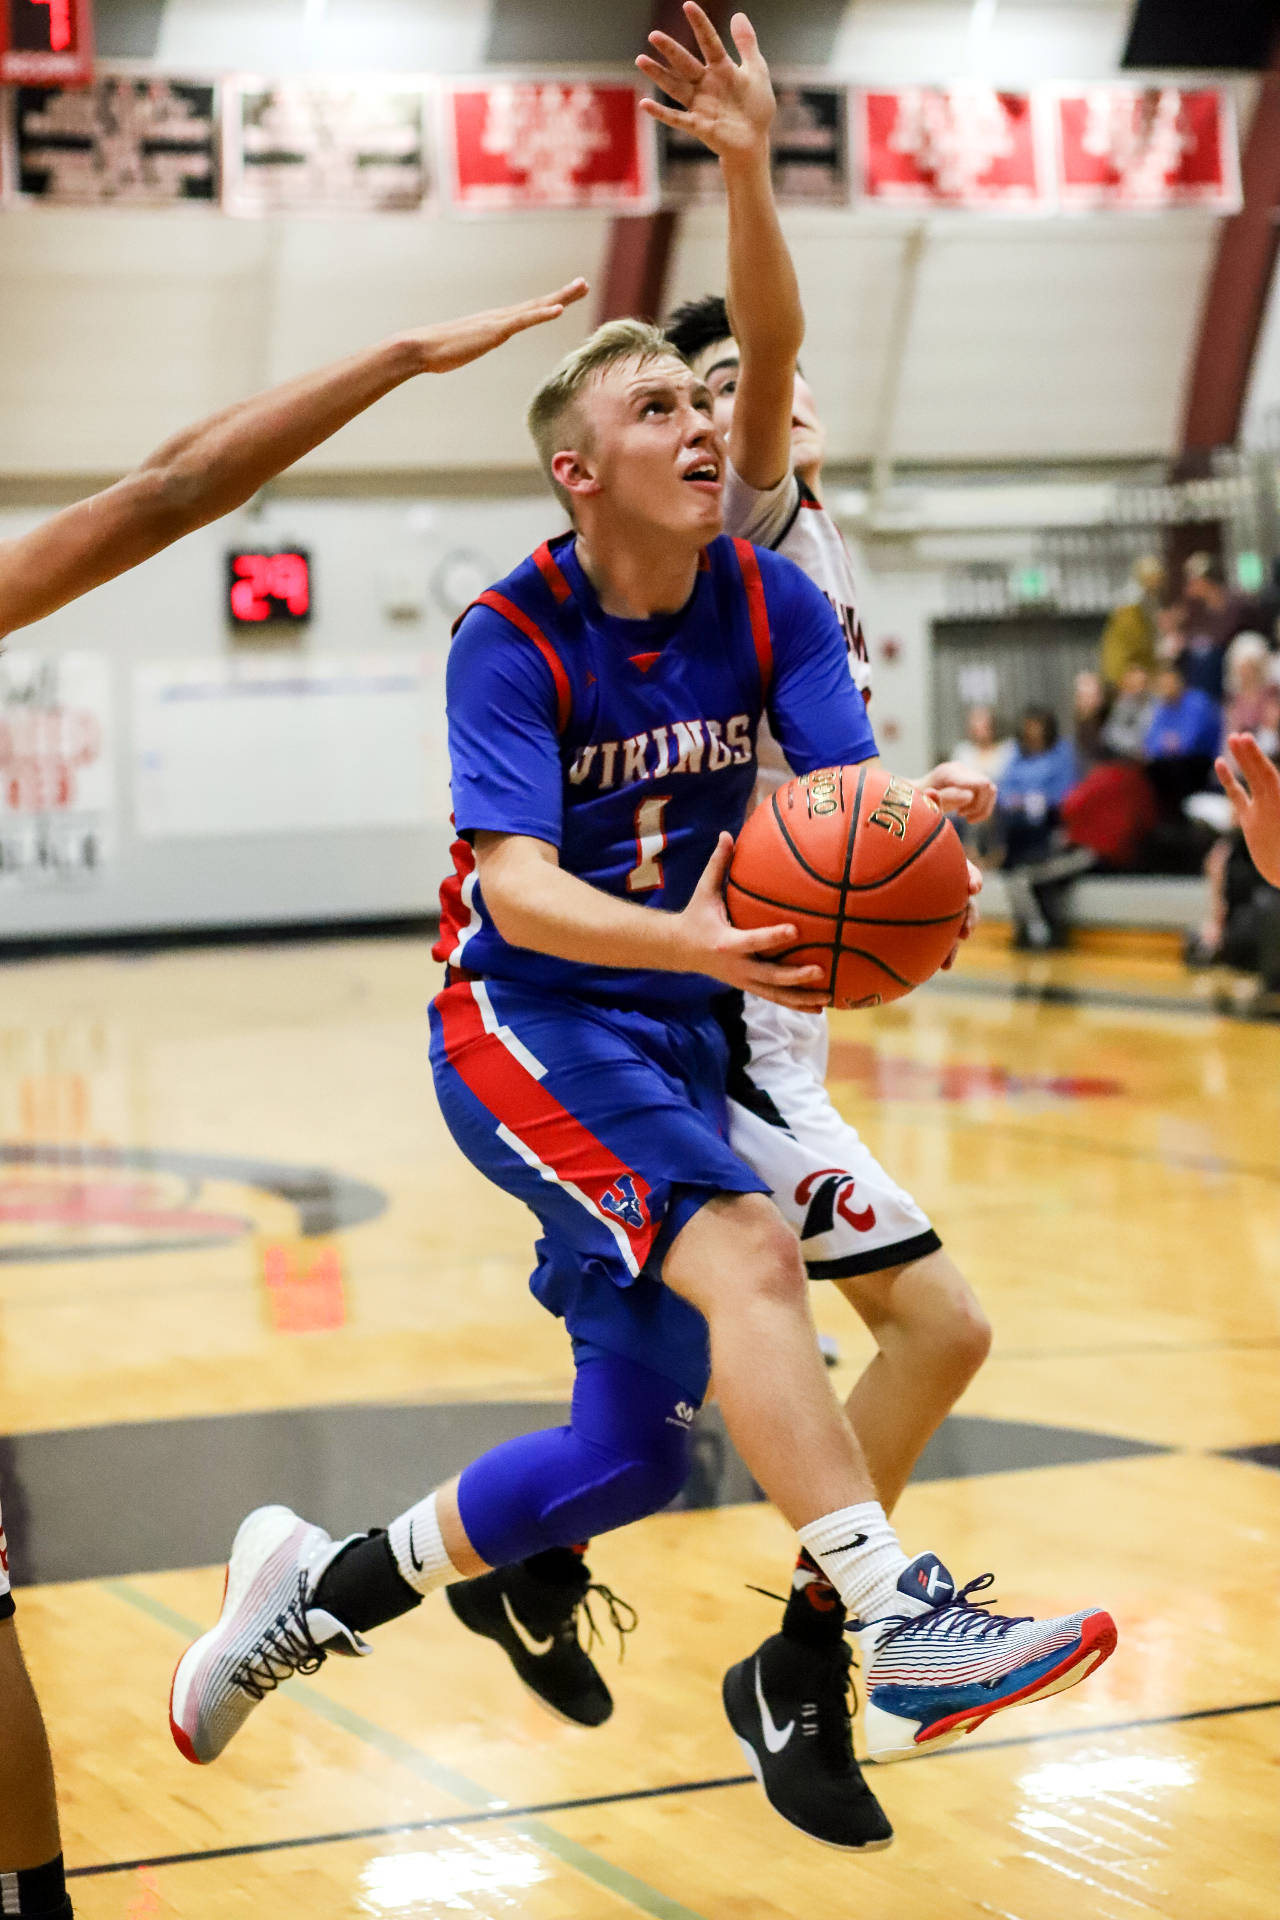 Willapa Valley’s Carter Pearson drives to the basket during Wednesday’s victory over Raymond at Raymond High School. (Photo by Larry Bale)